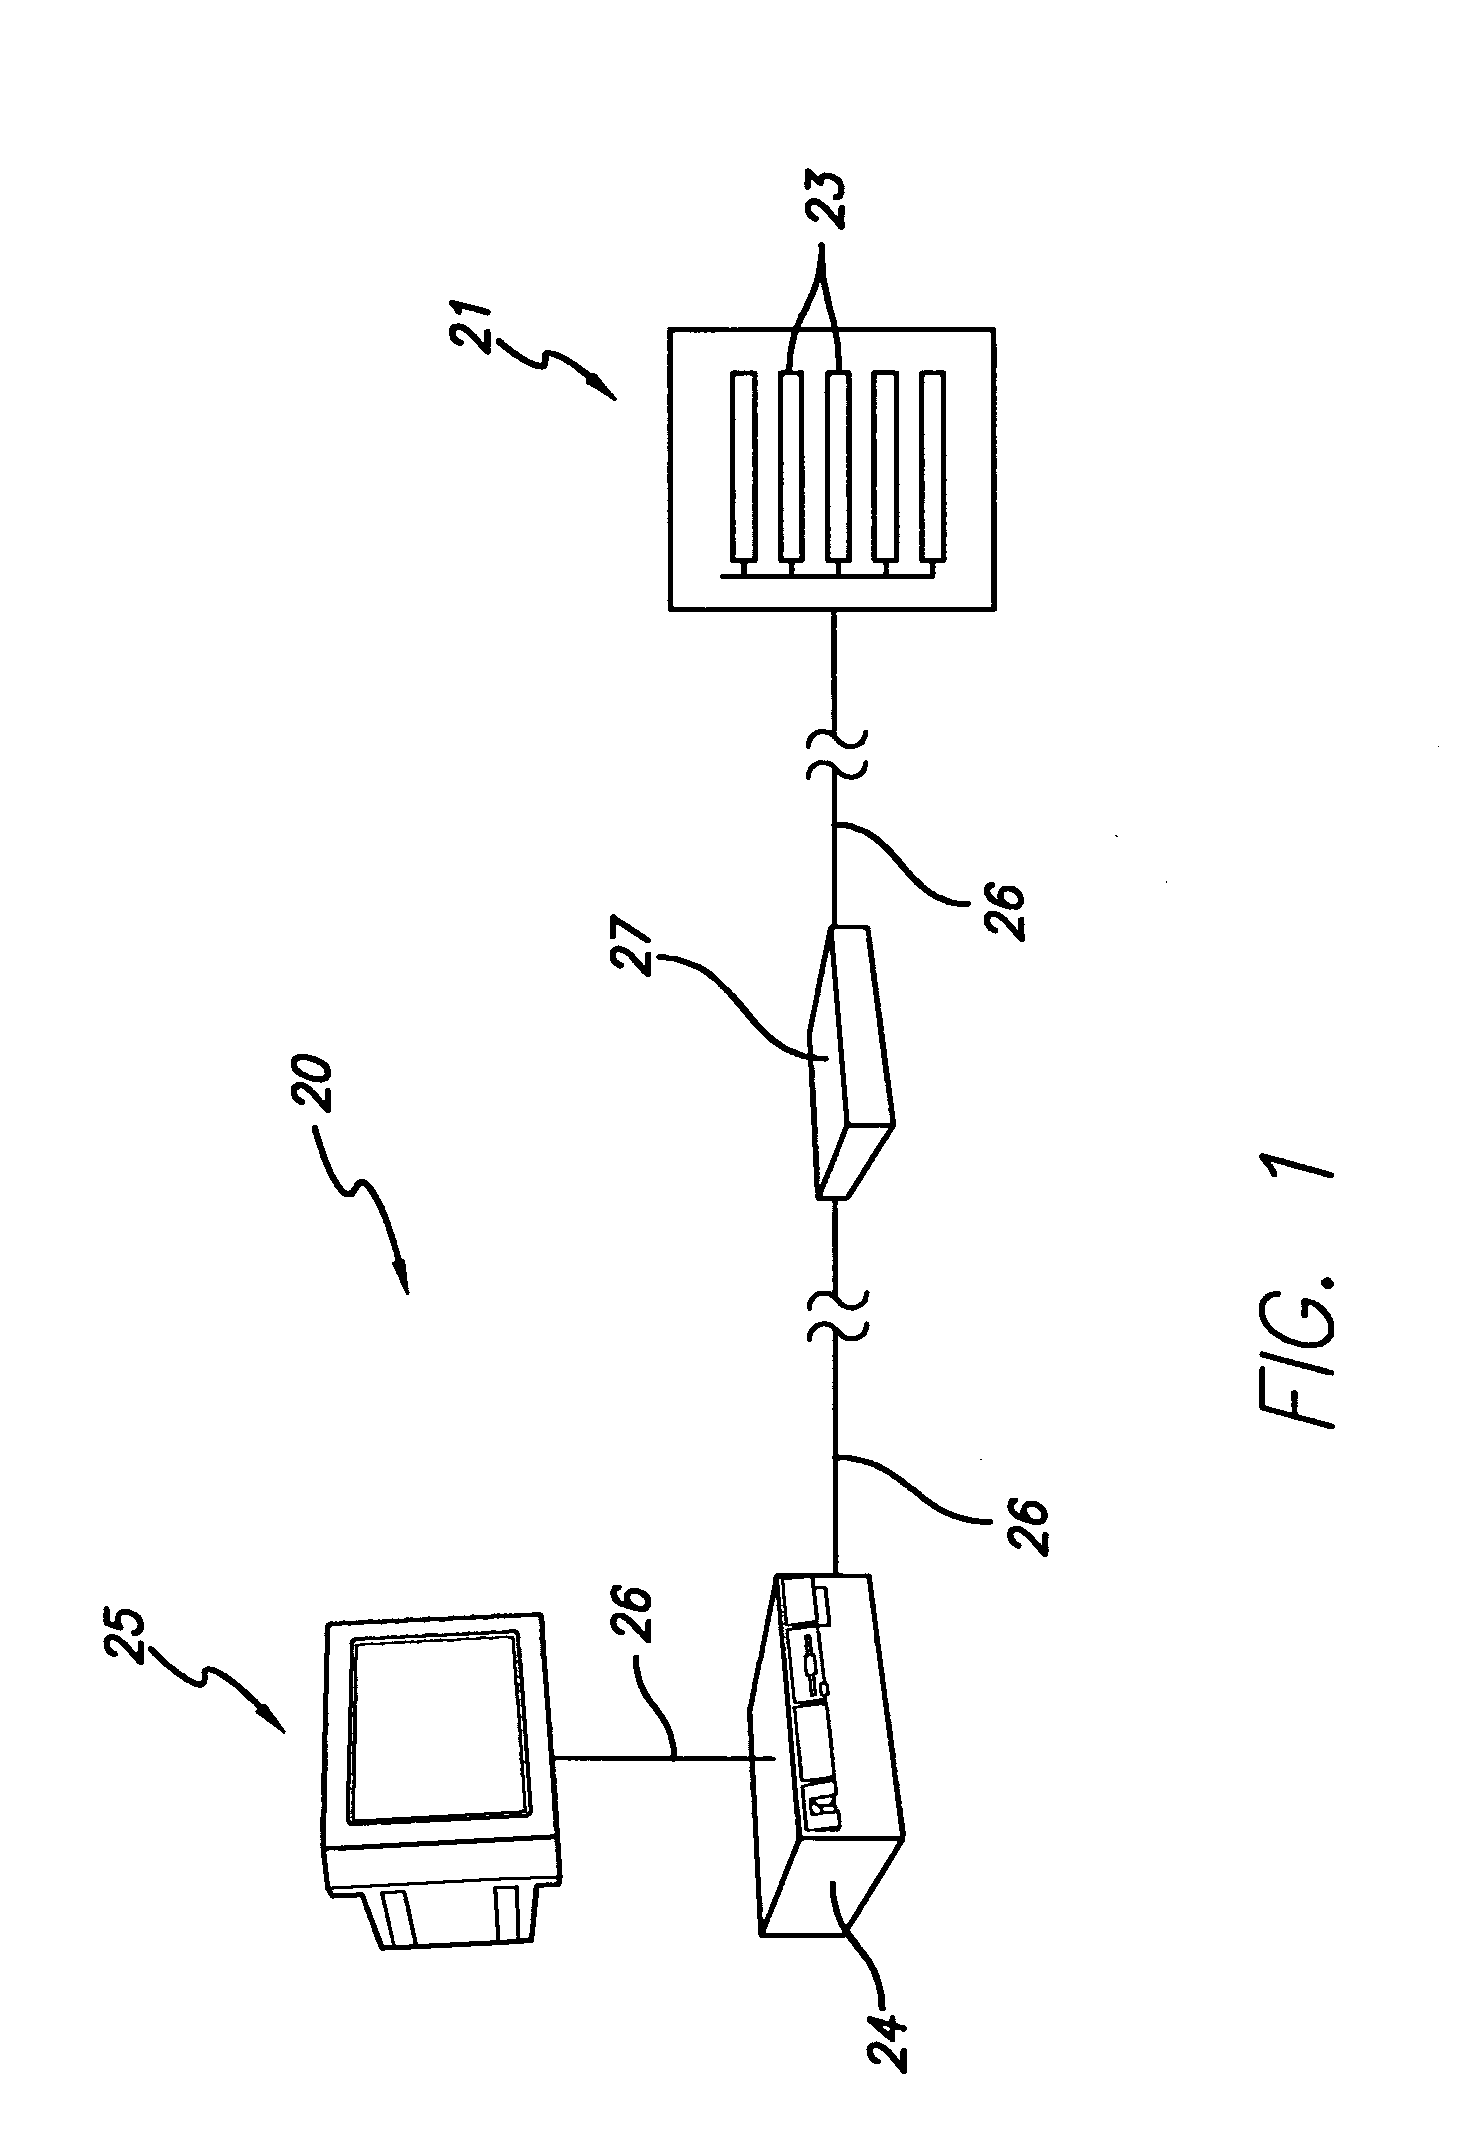 Method and system for integrating a passive sensor array with a mattress for patient monitoring